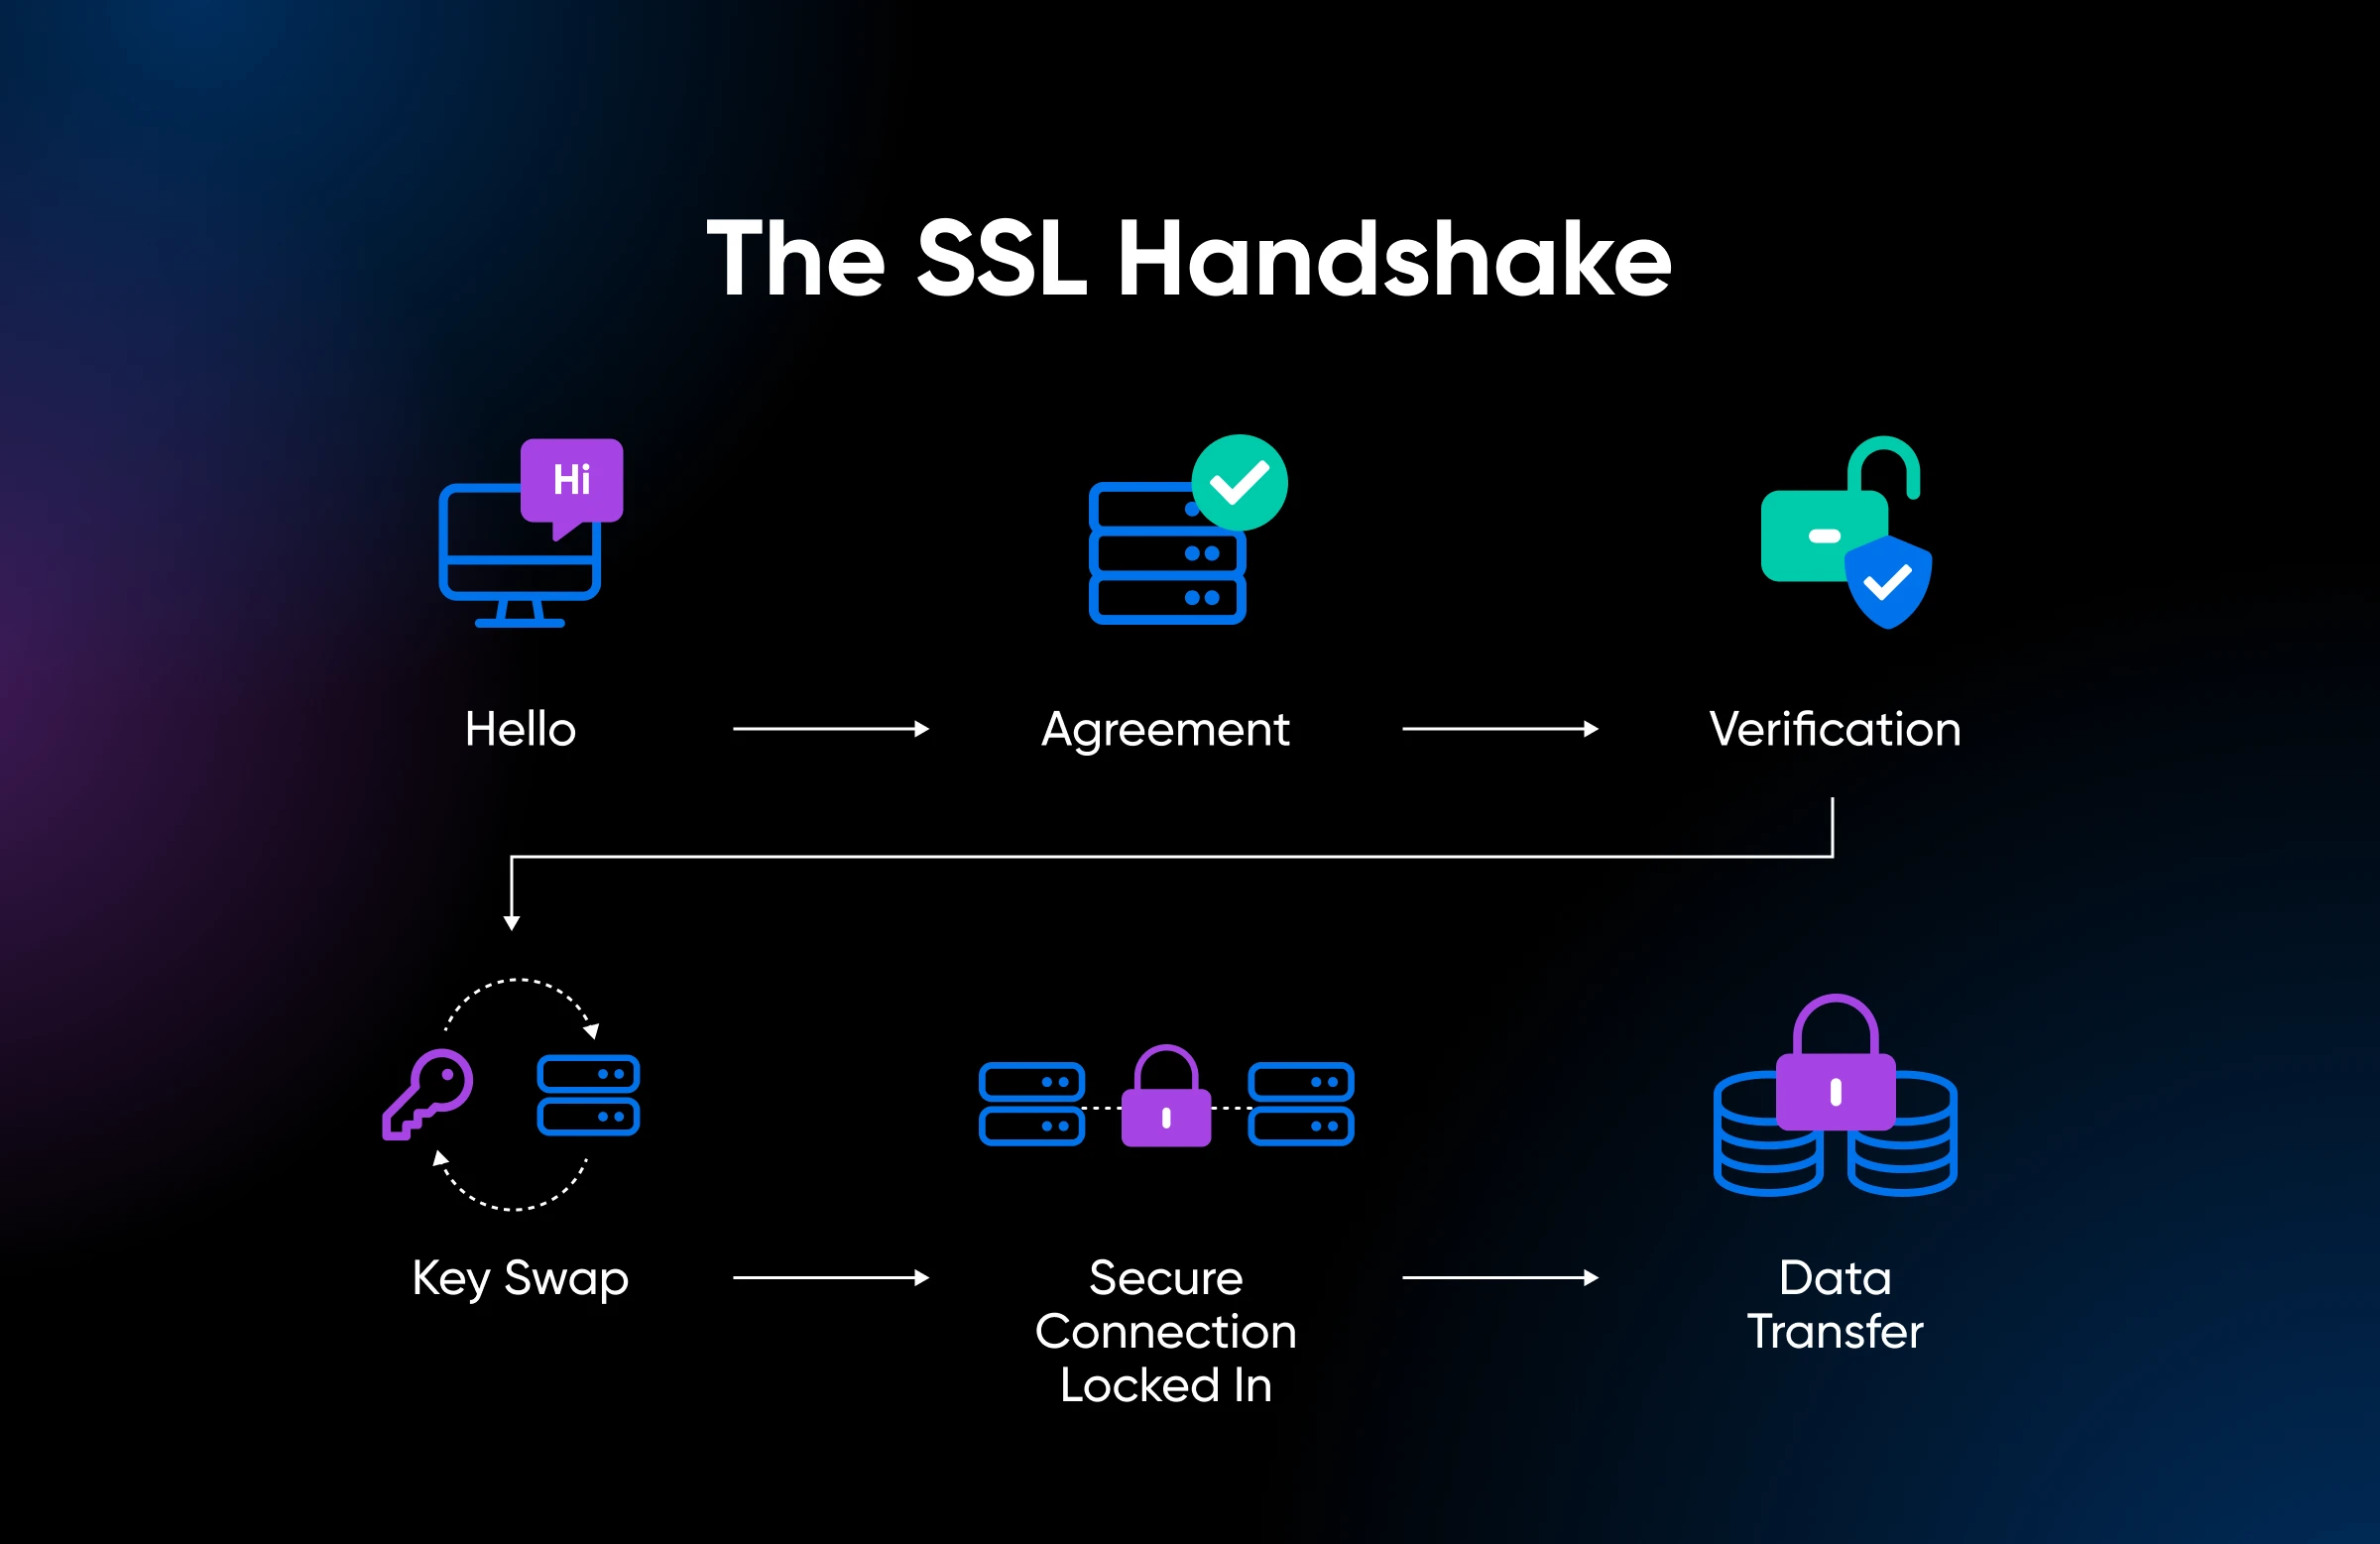 An infographic of the SSL handshake process with steps like Hello, Agreement, Verification, Key Swap, and Data Transfer.